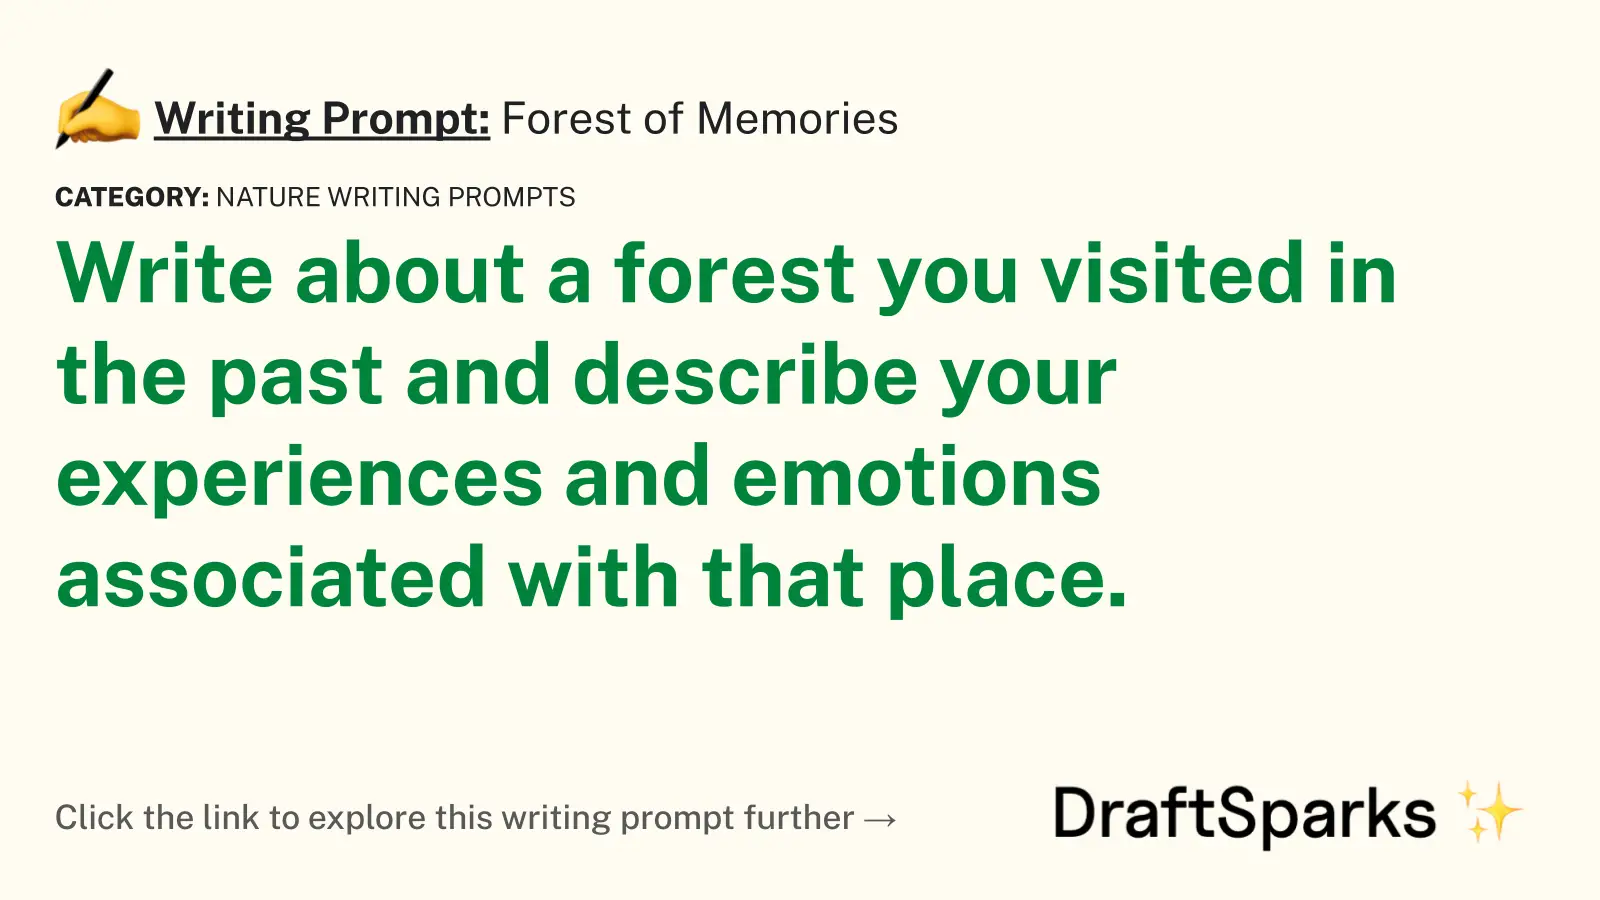 Forest of Memories